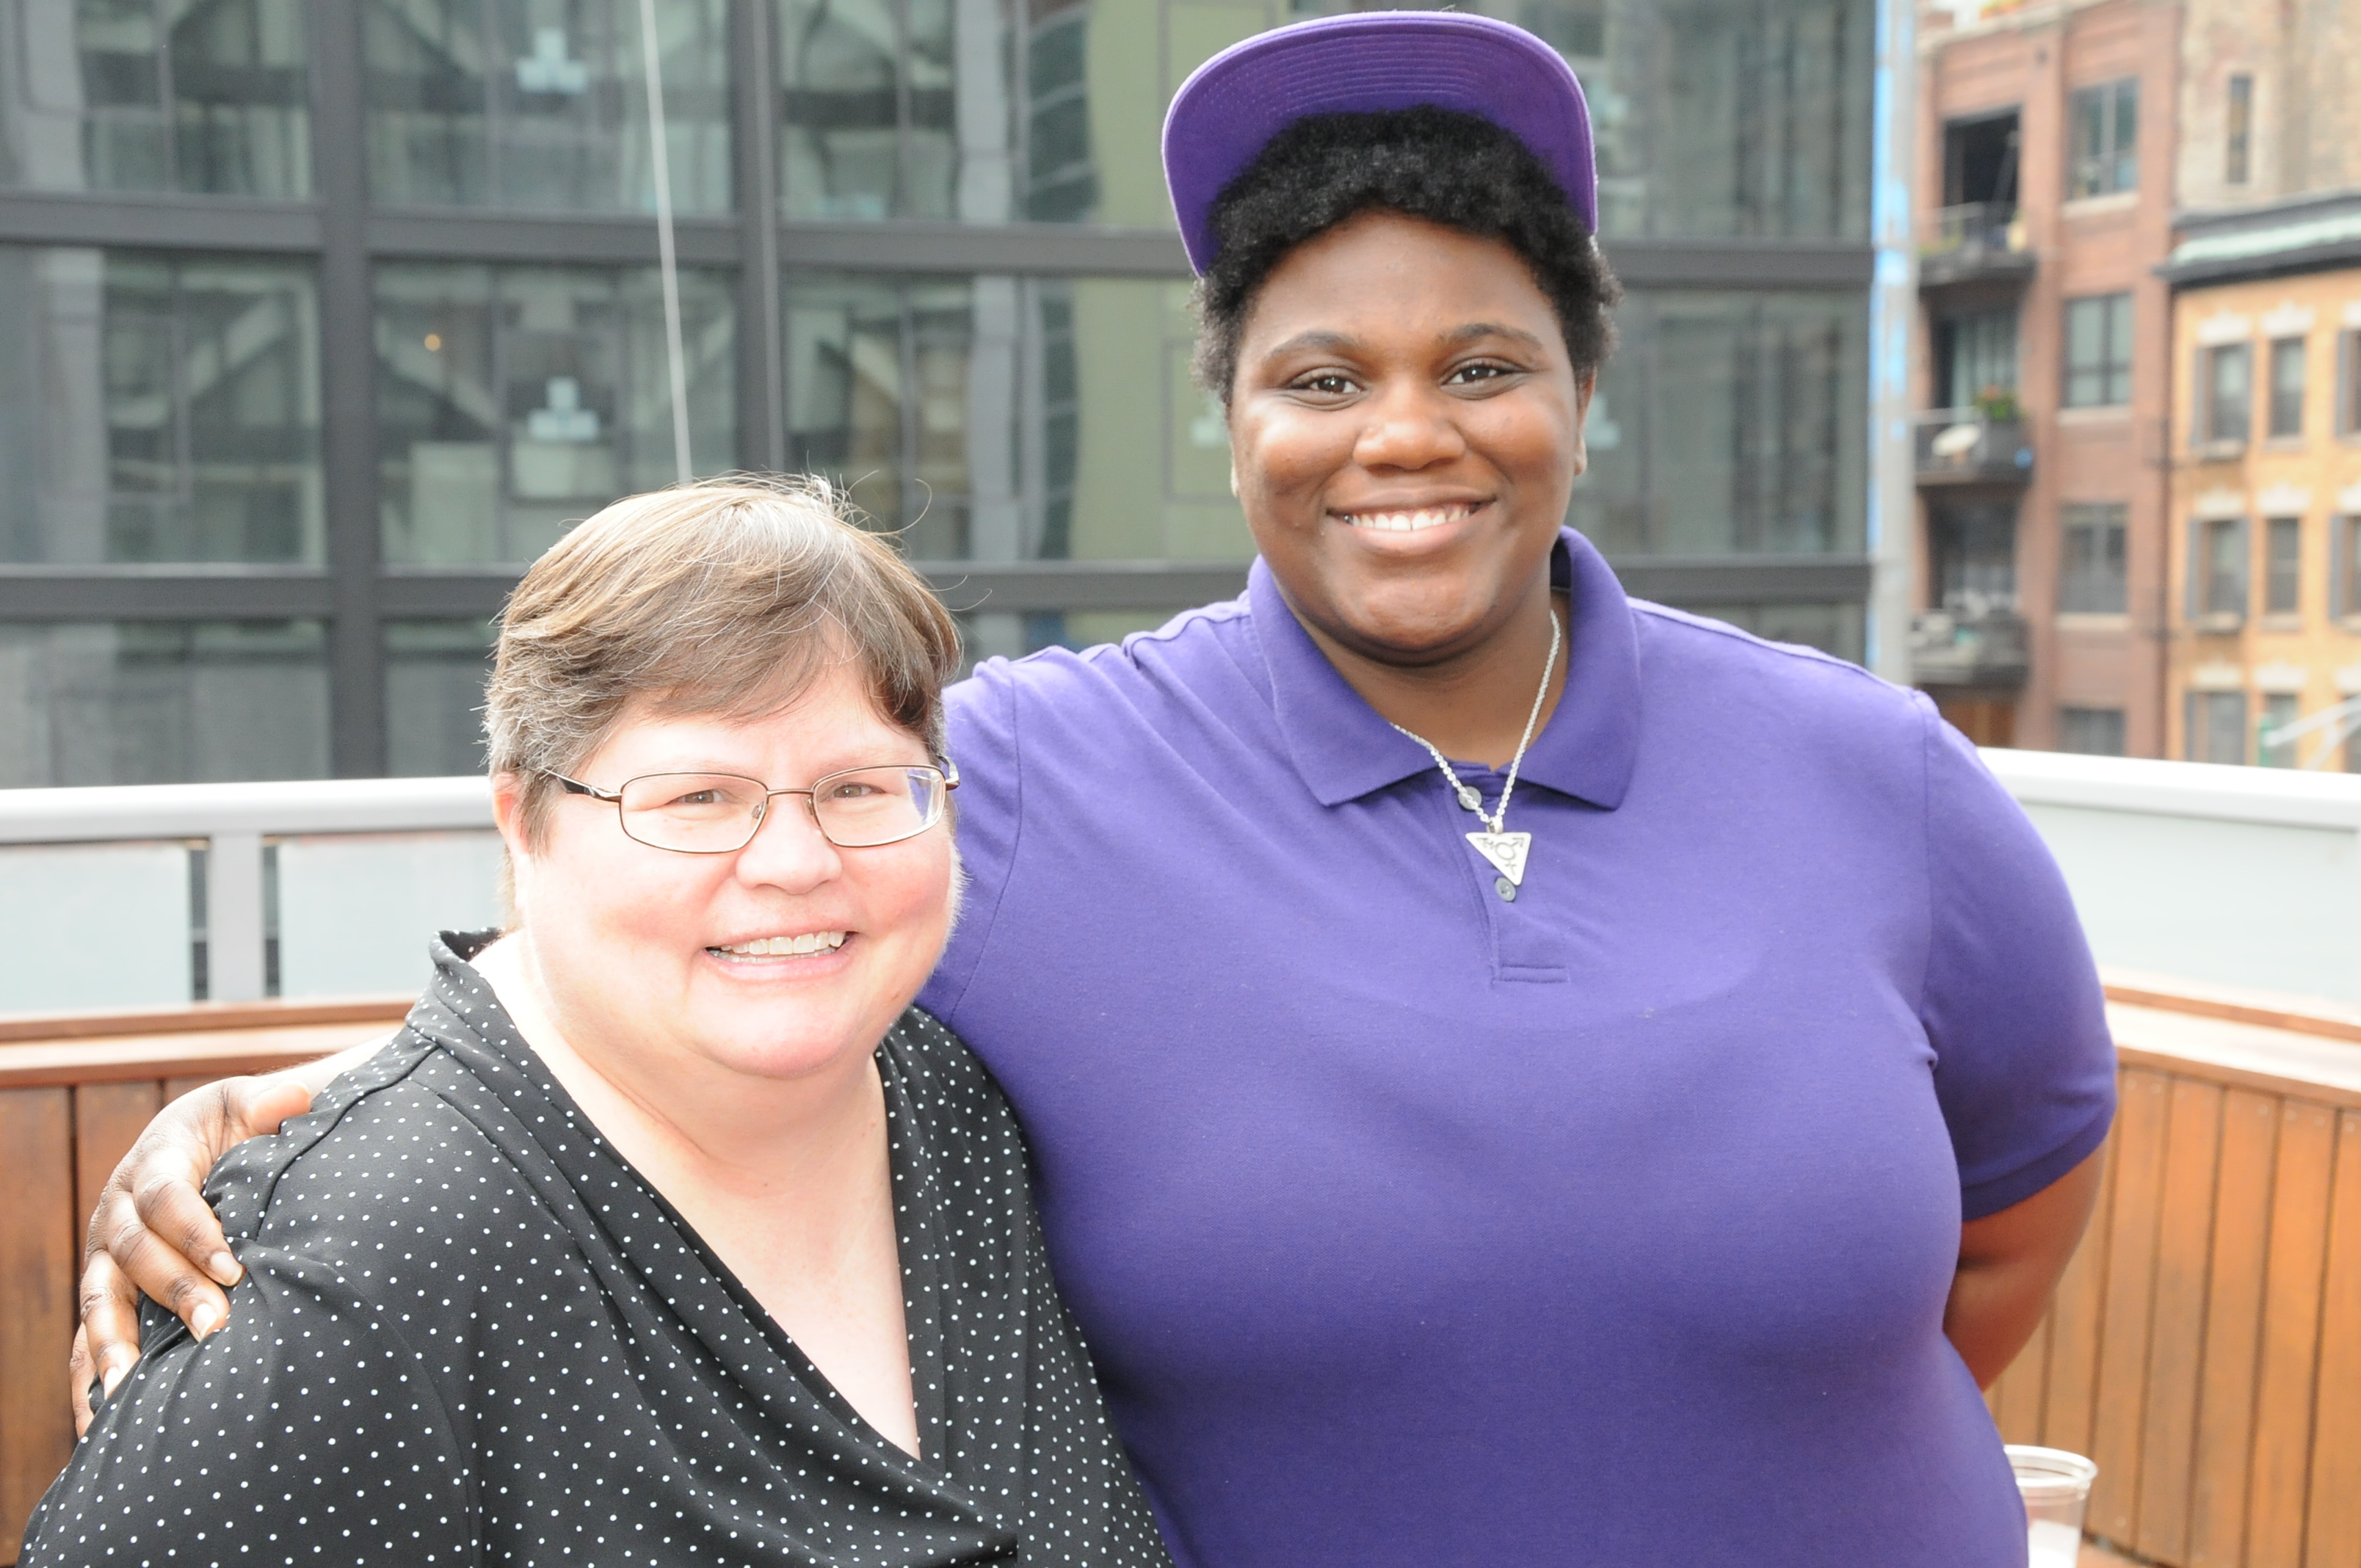 Windy City Times editor Tracy Baim (left) with Breezy Connor in 2018. Connor read her poem, about her experiences battling the elements as a homeless teen in Chicago during winter, at a summit on homeless LGBTQ youth organized by the Windy City Times in 2014